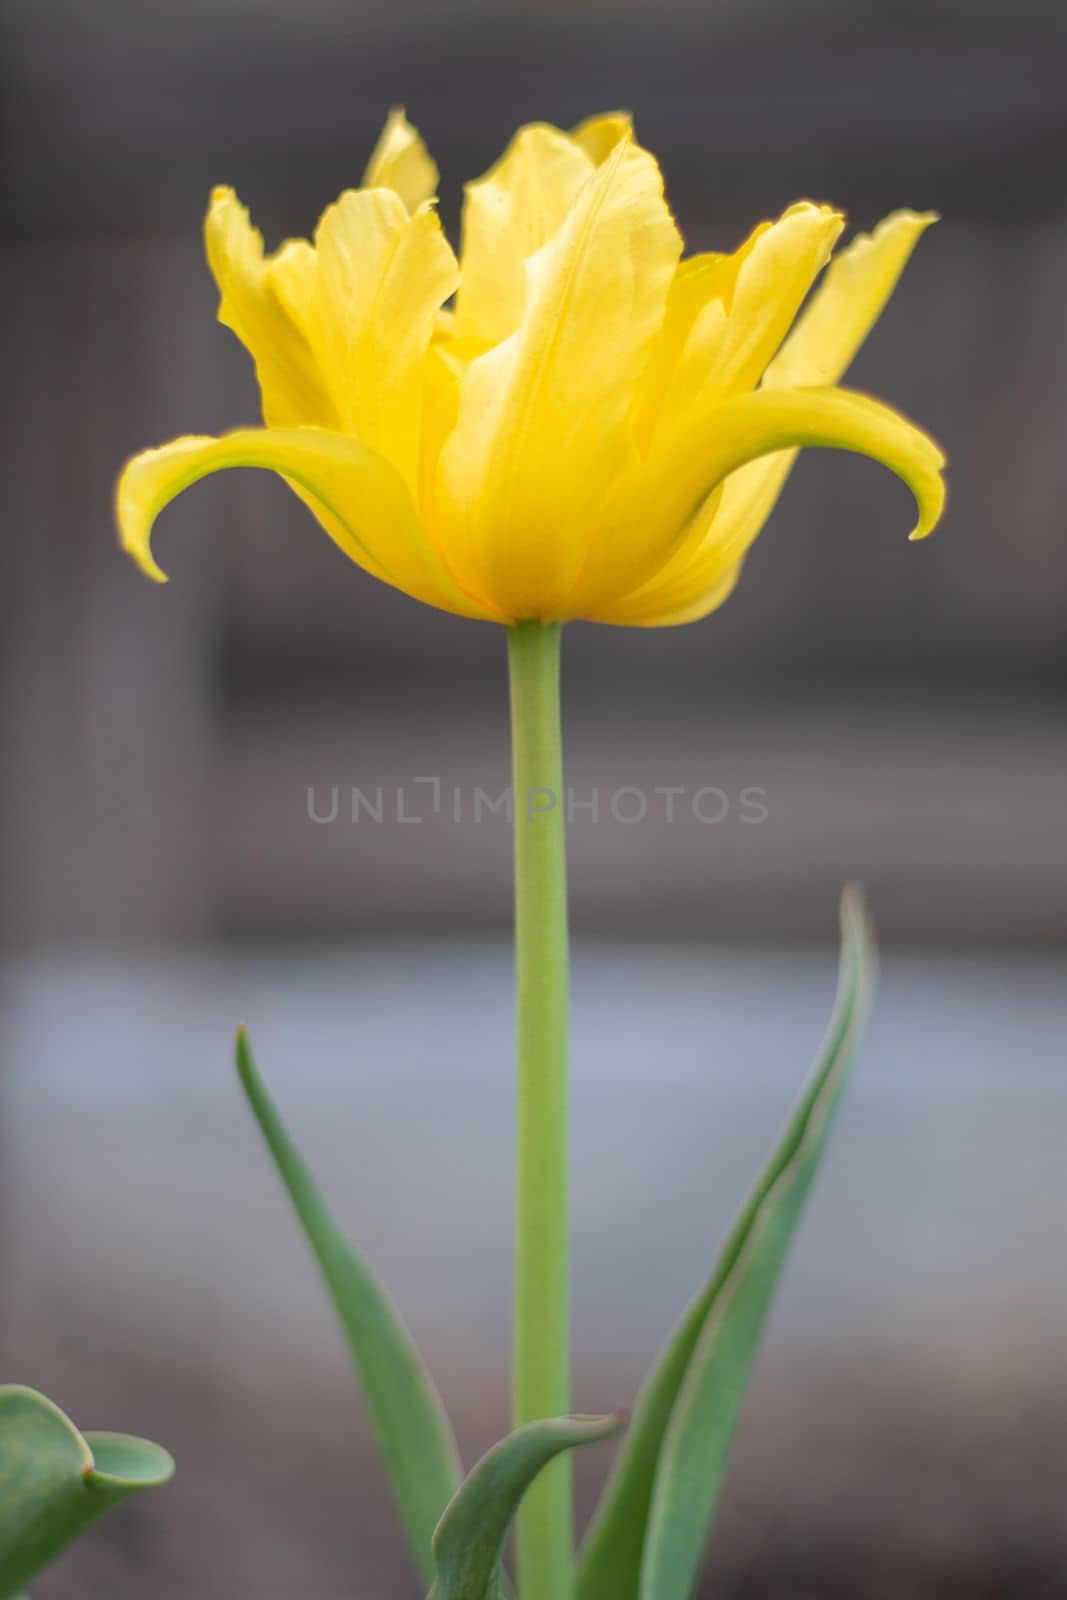 Selective focus of one yellow tulip in the garden with green leaves. Blurred background. A flower that grows among the grass on a warm sunny day. Spring and Easter natural background with tulip